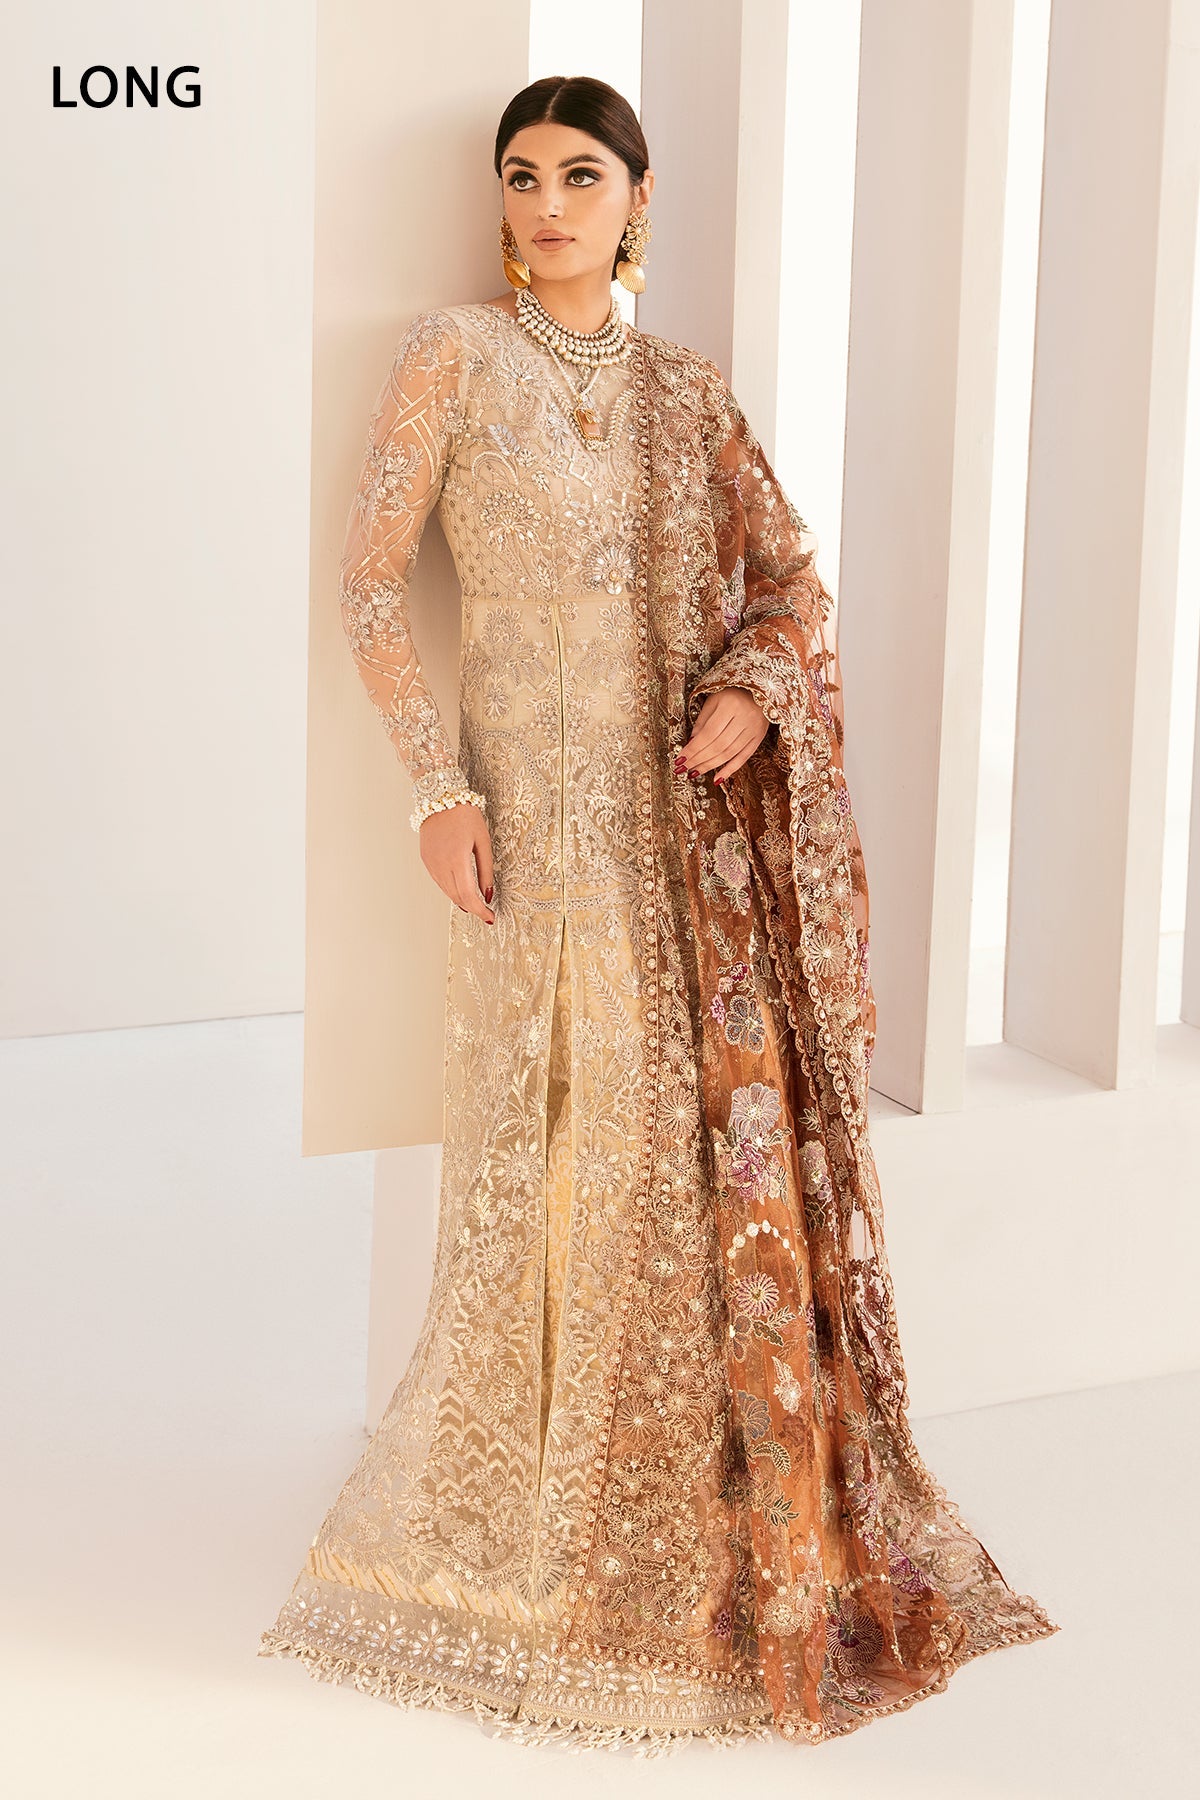 CH11-D03 - Chantelle Embroidered Collection Chapter 11 by Baroque Fashion - Shahana Collection UK